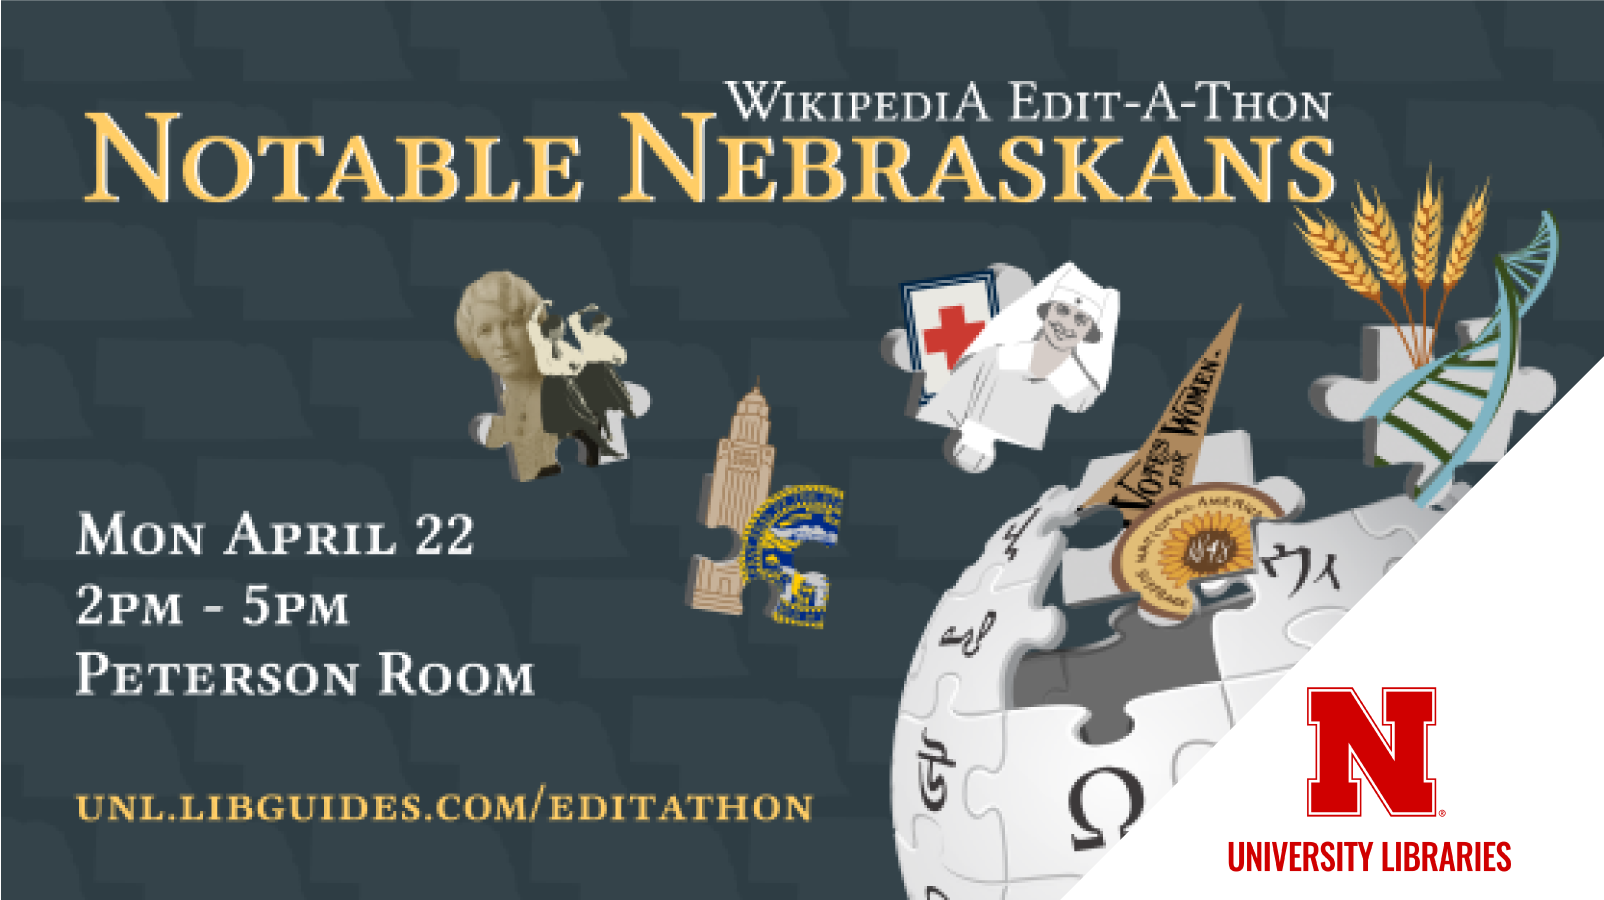 No experience necessary to participate in this year's Wikipedia Edit-A-Thon.